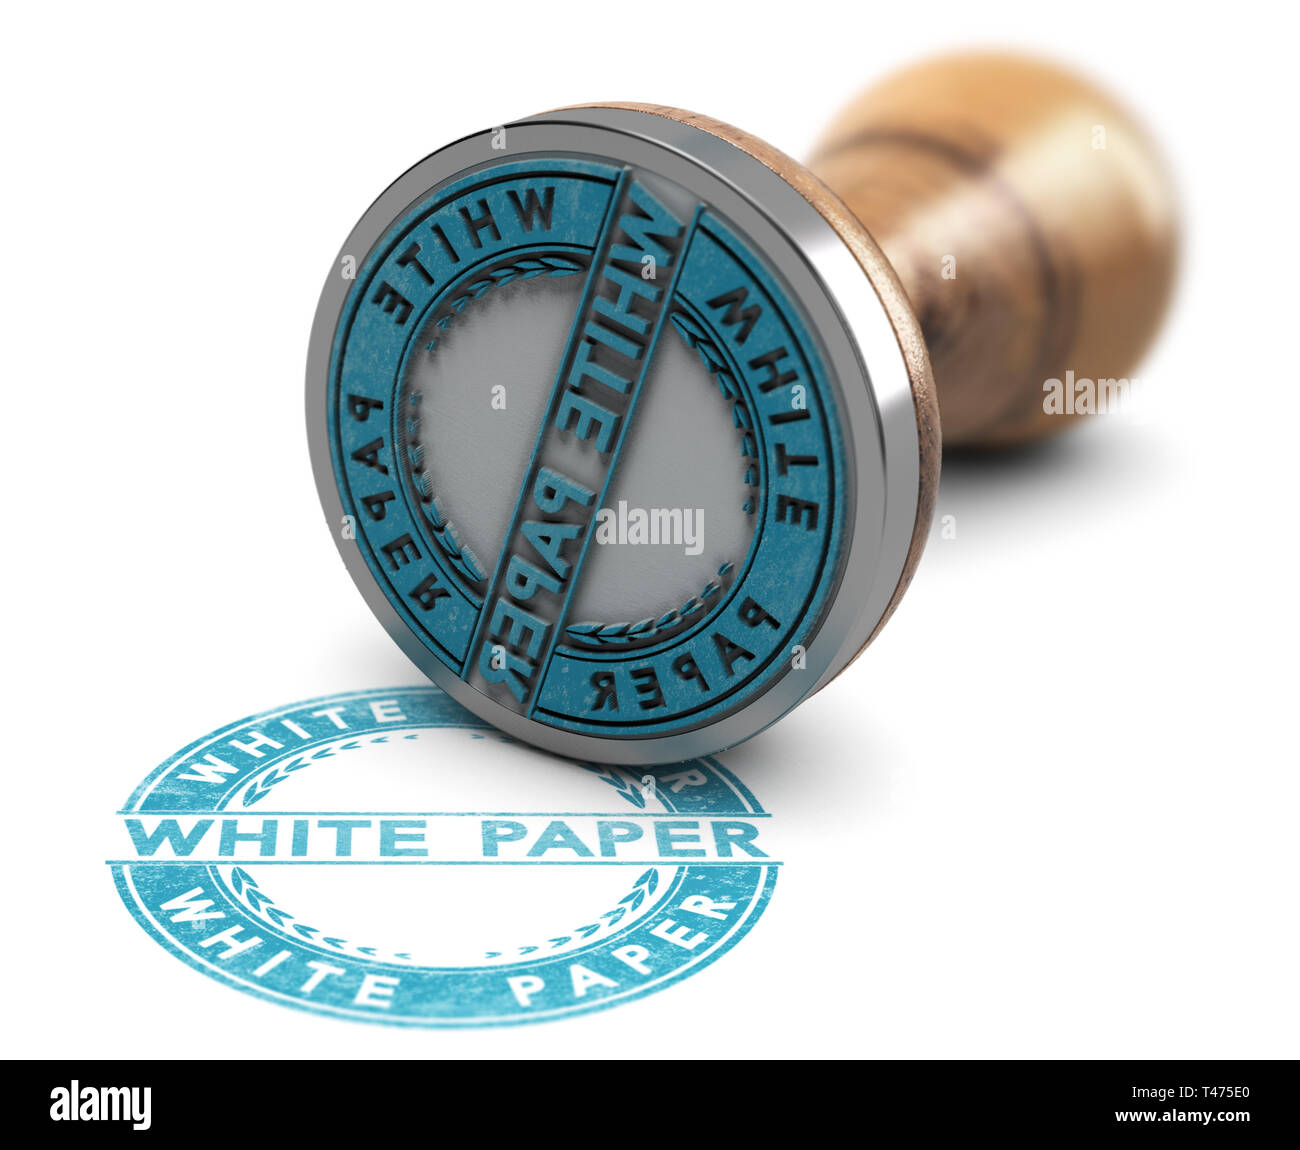 3d illustration of a rubber stamp over white background with the text white paper printed in blue color Stock Photo